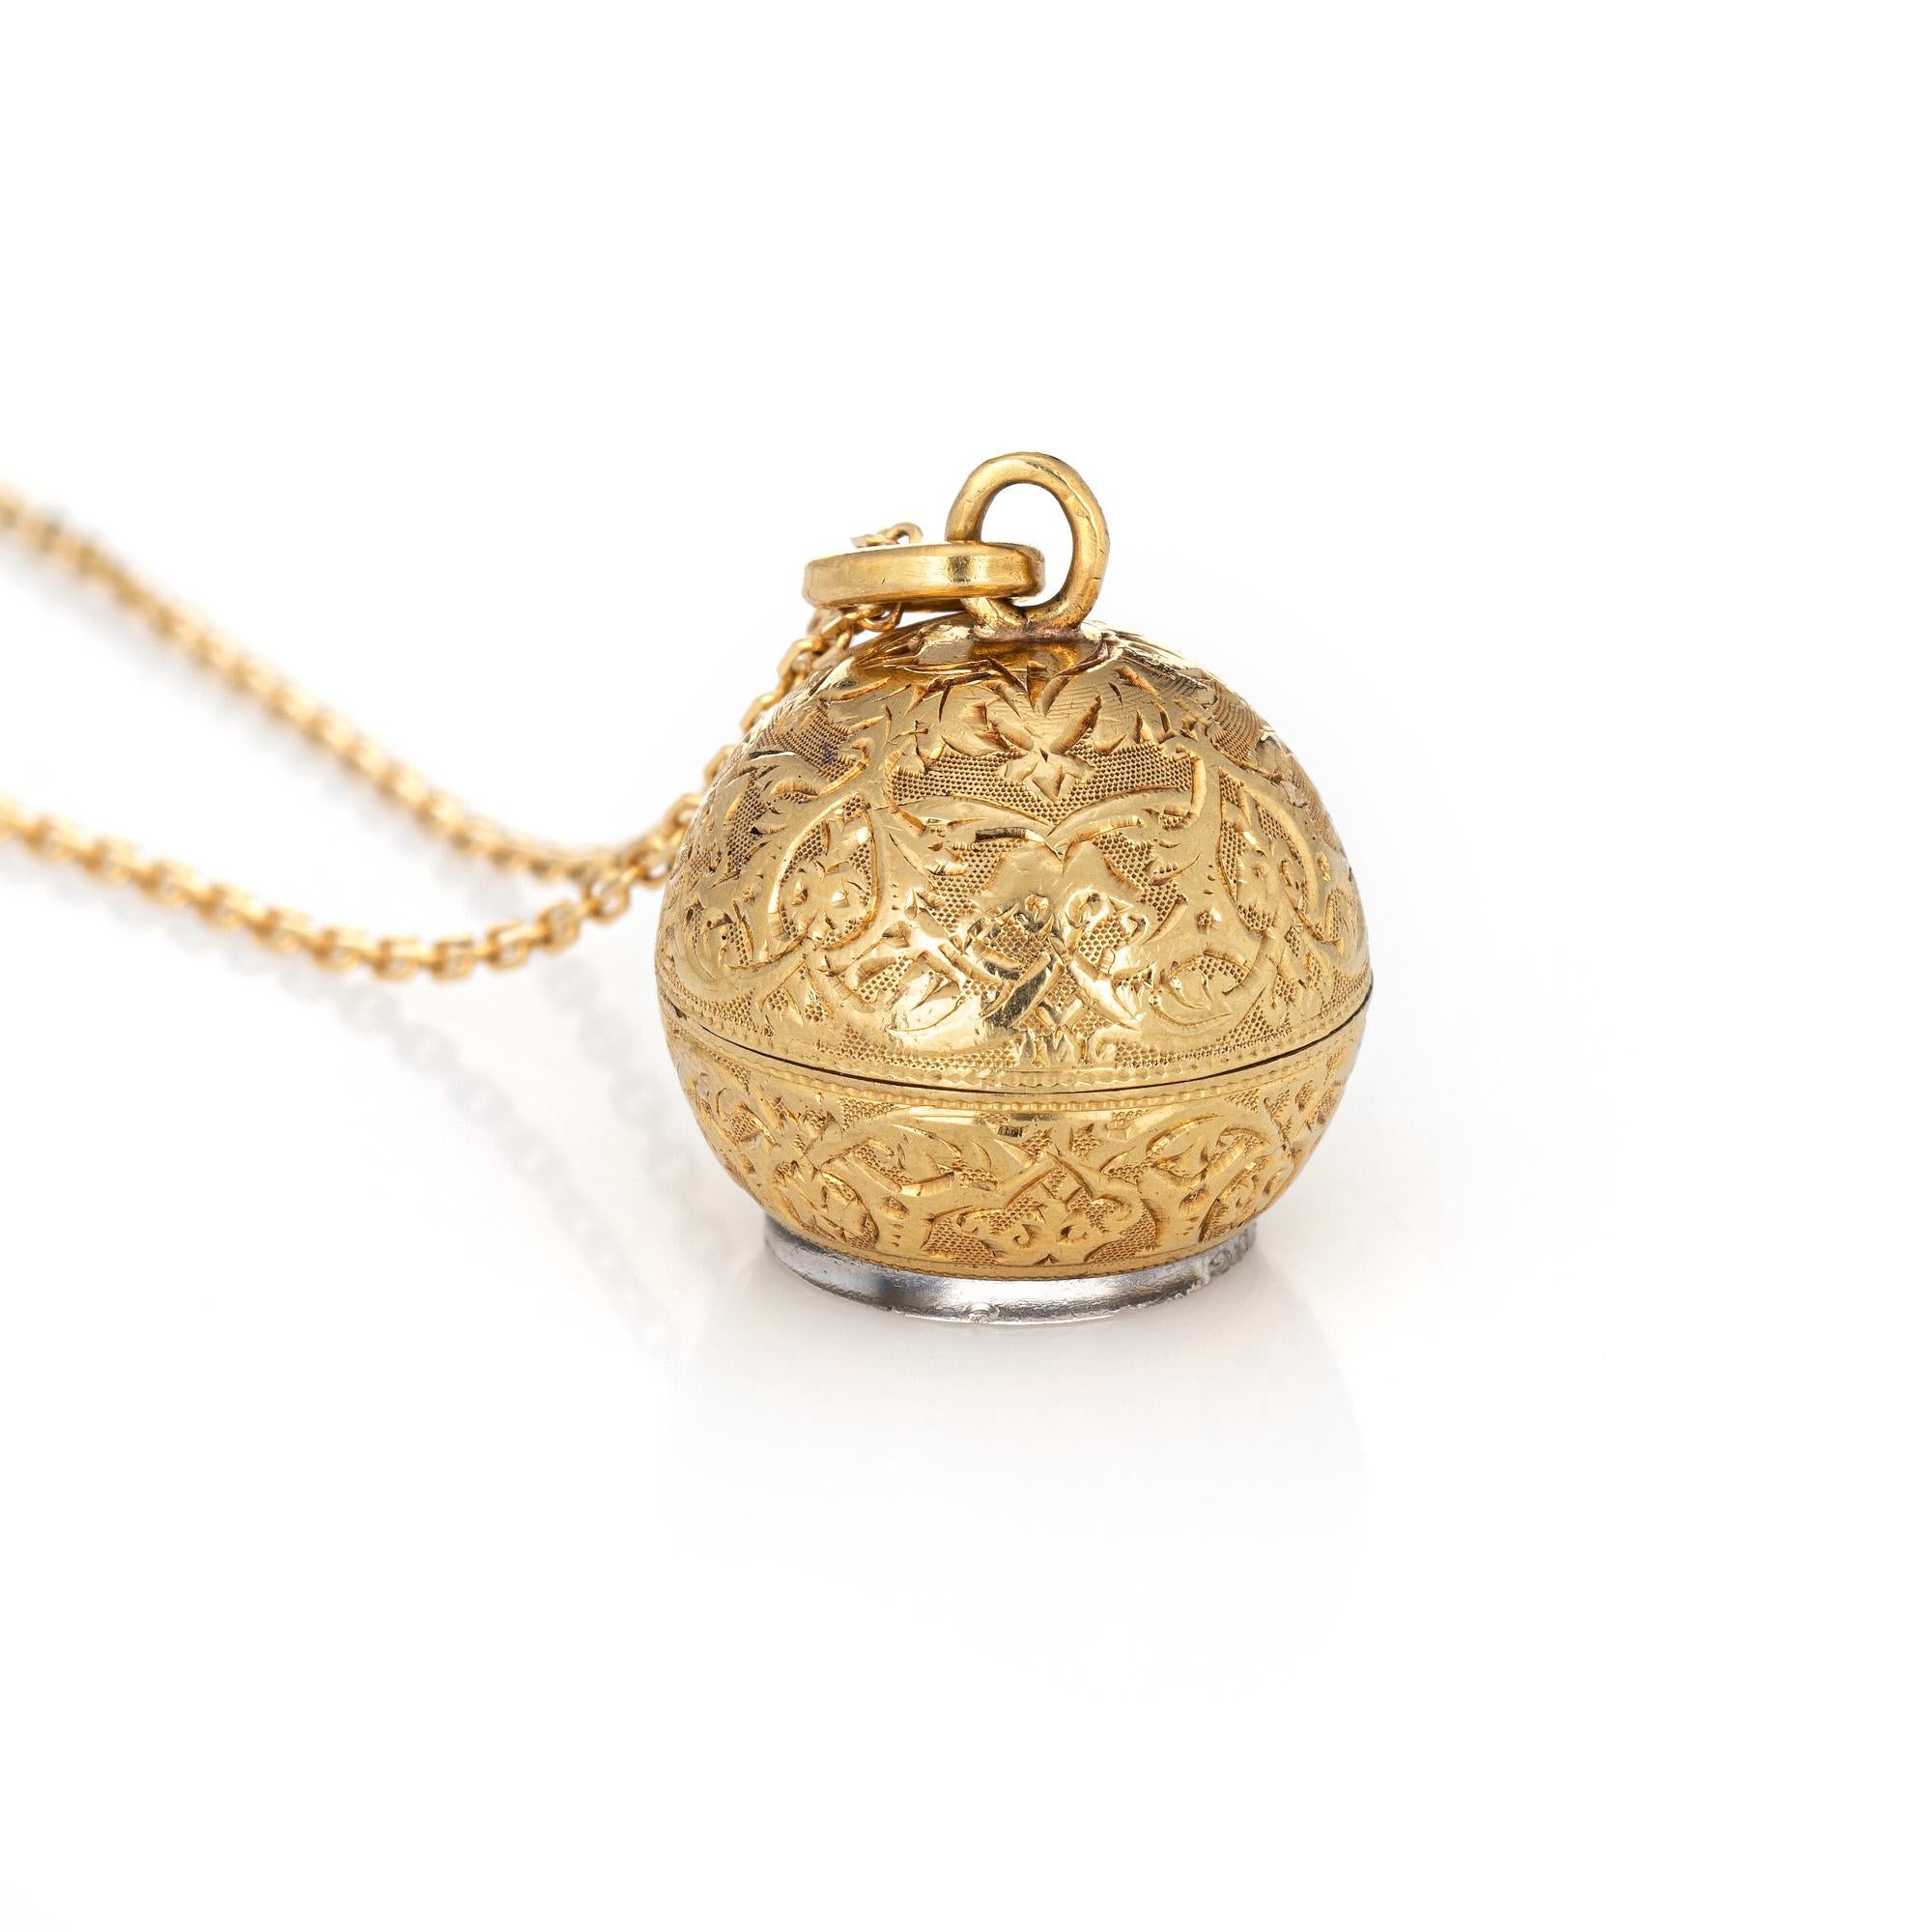 Finely detailed vintage Gubelin pendant watch crafted in 18 karat yellow gold (pendant watch) and 14k yellow gold (chain). 

The finely detailed pendant watch by Gubelin features a mechanical wind-up movement. The watch is currently working and